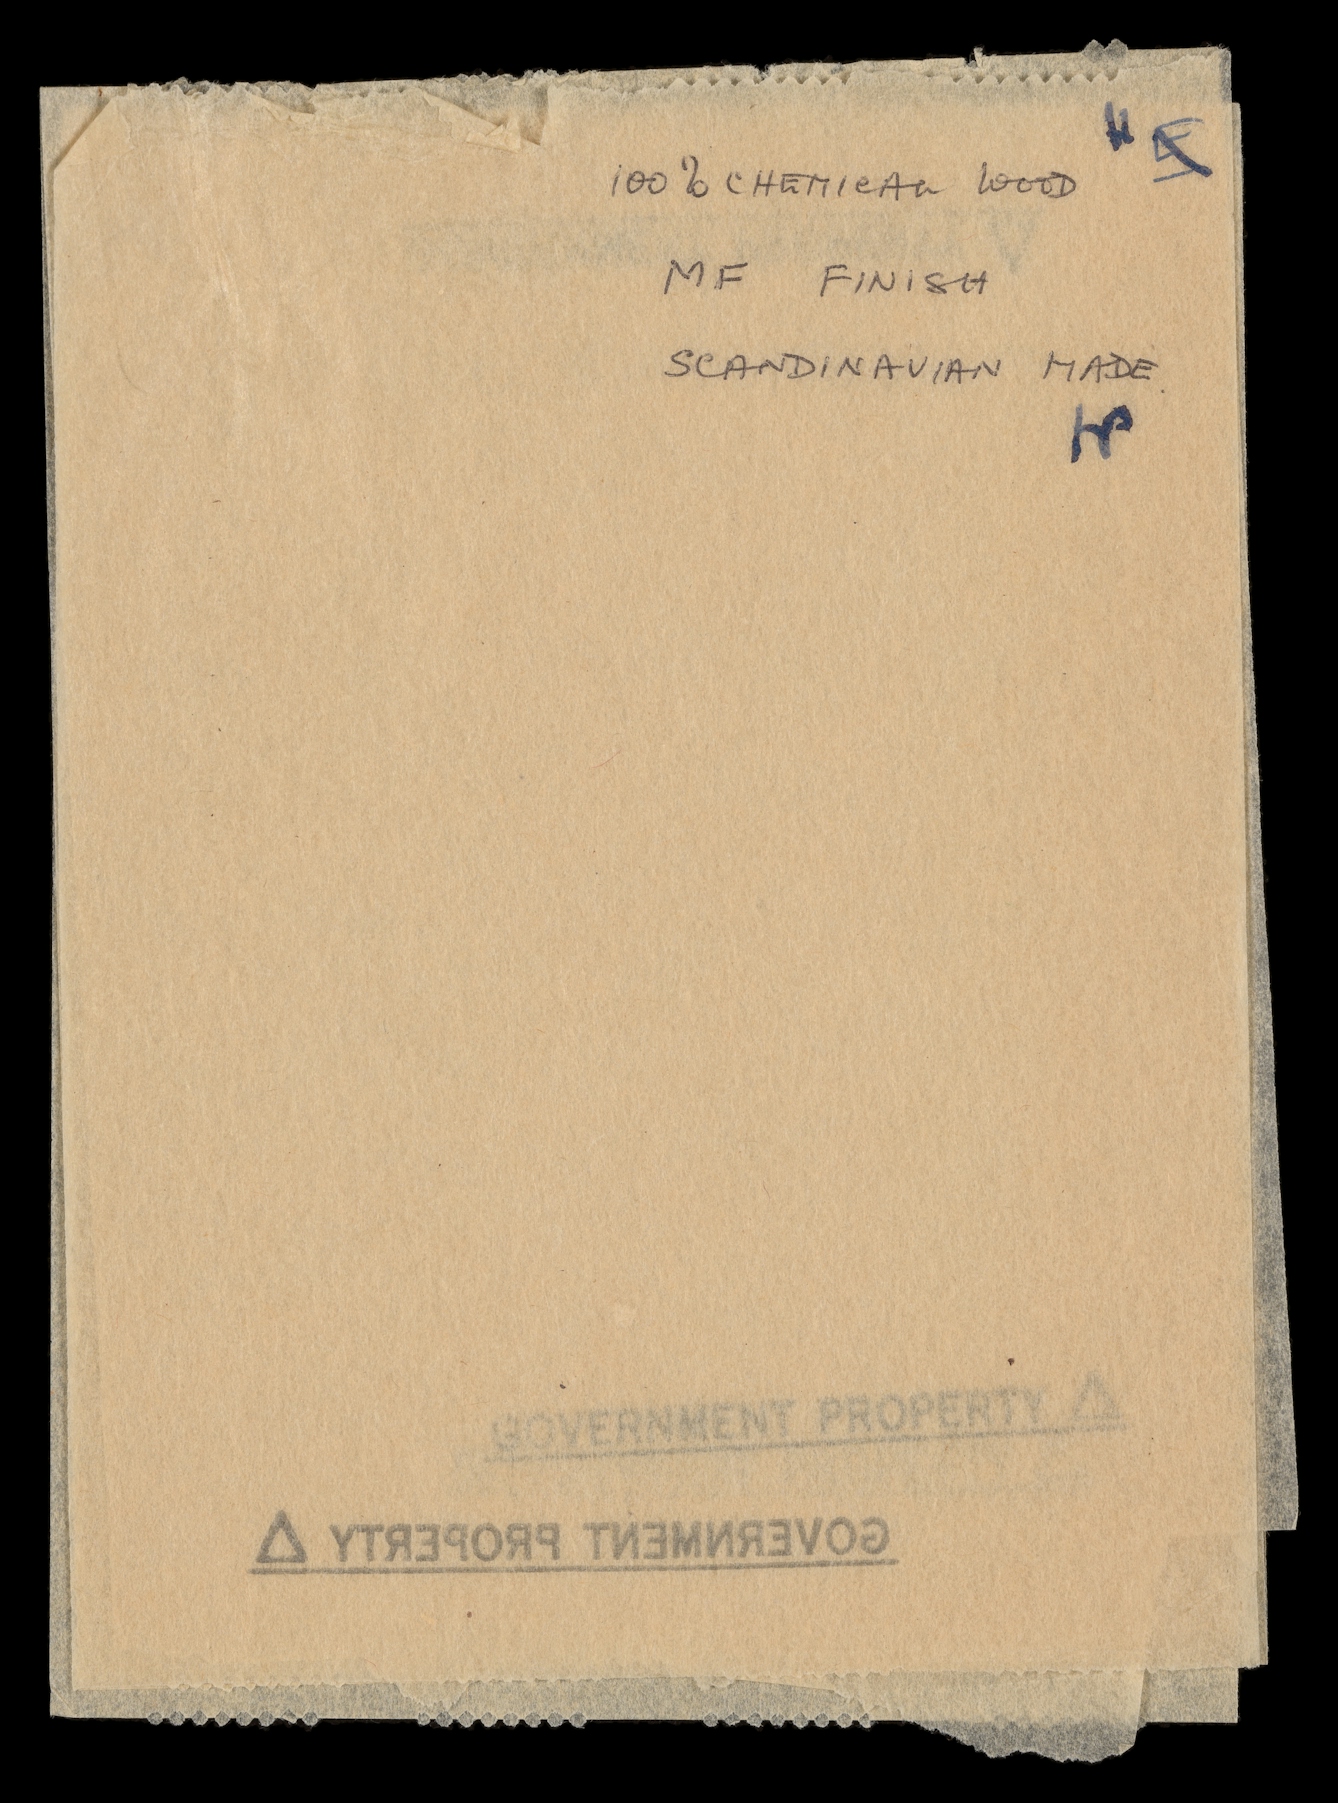 Photograph of a toilet paper sample sheet, bearing the hand written words "100% chemical wood, MG. Finish, Scandinavian made".